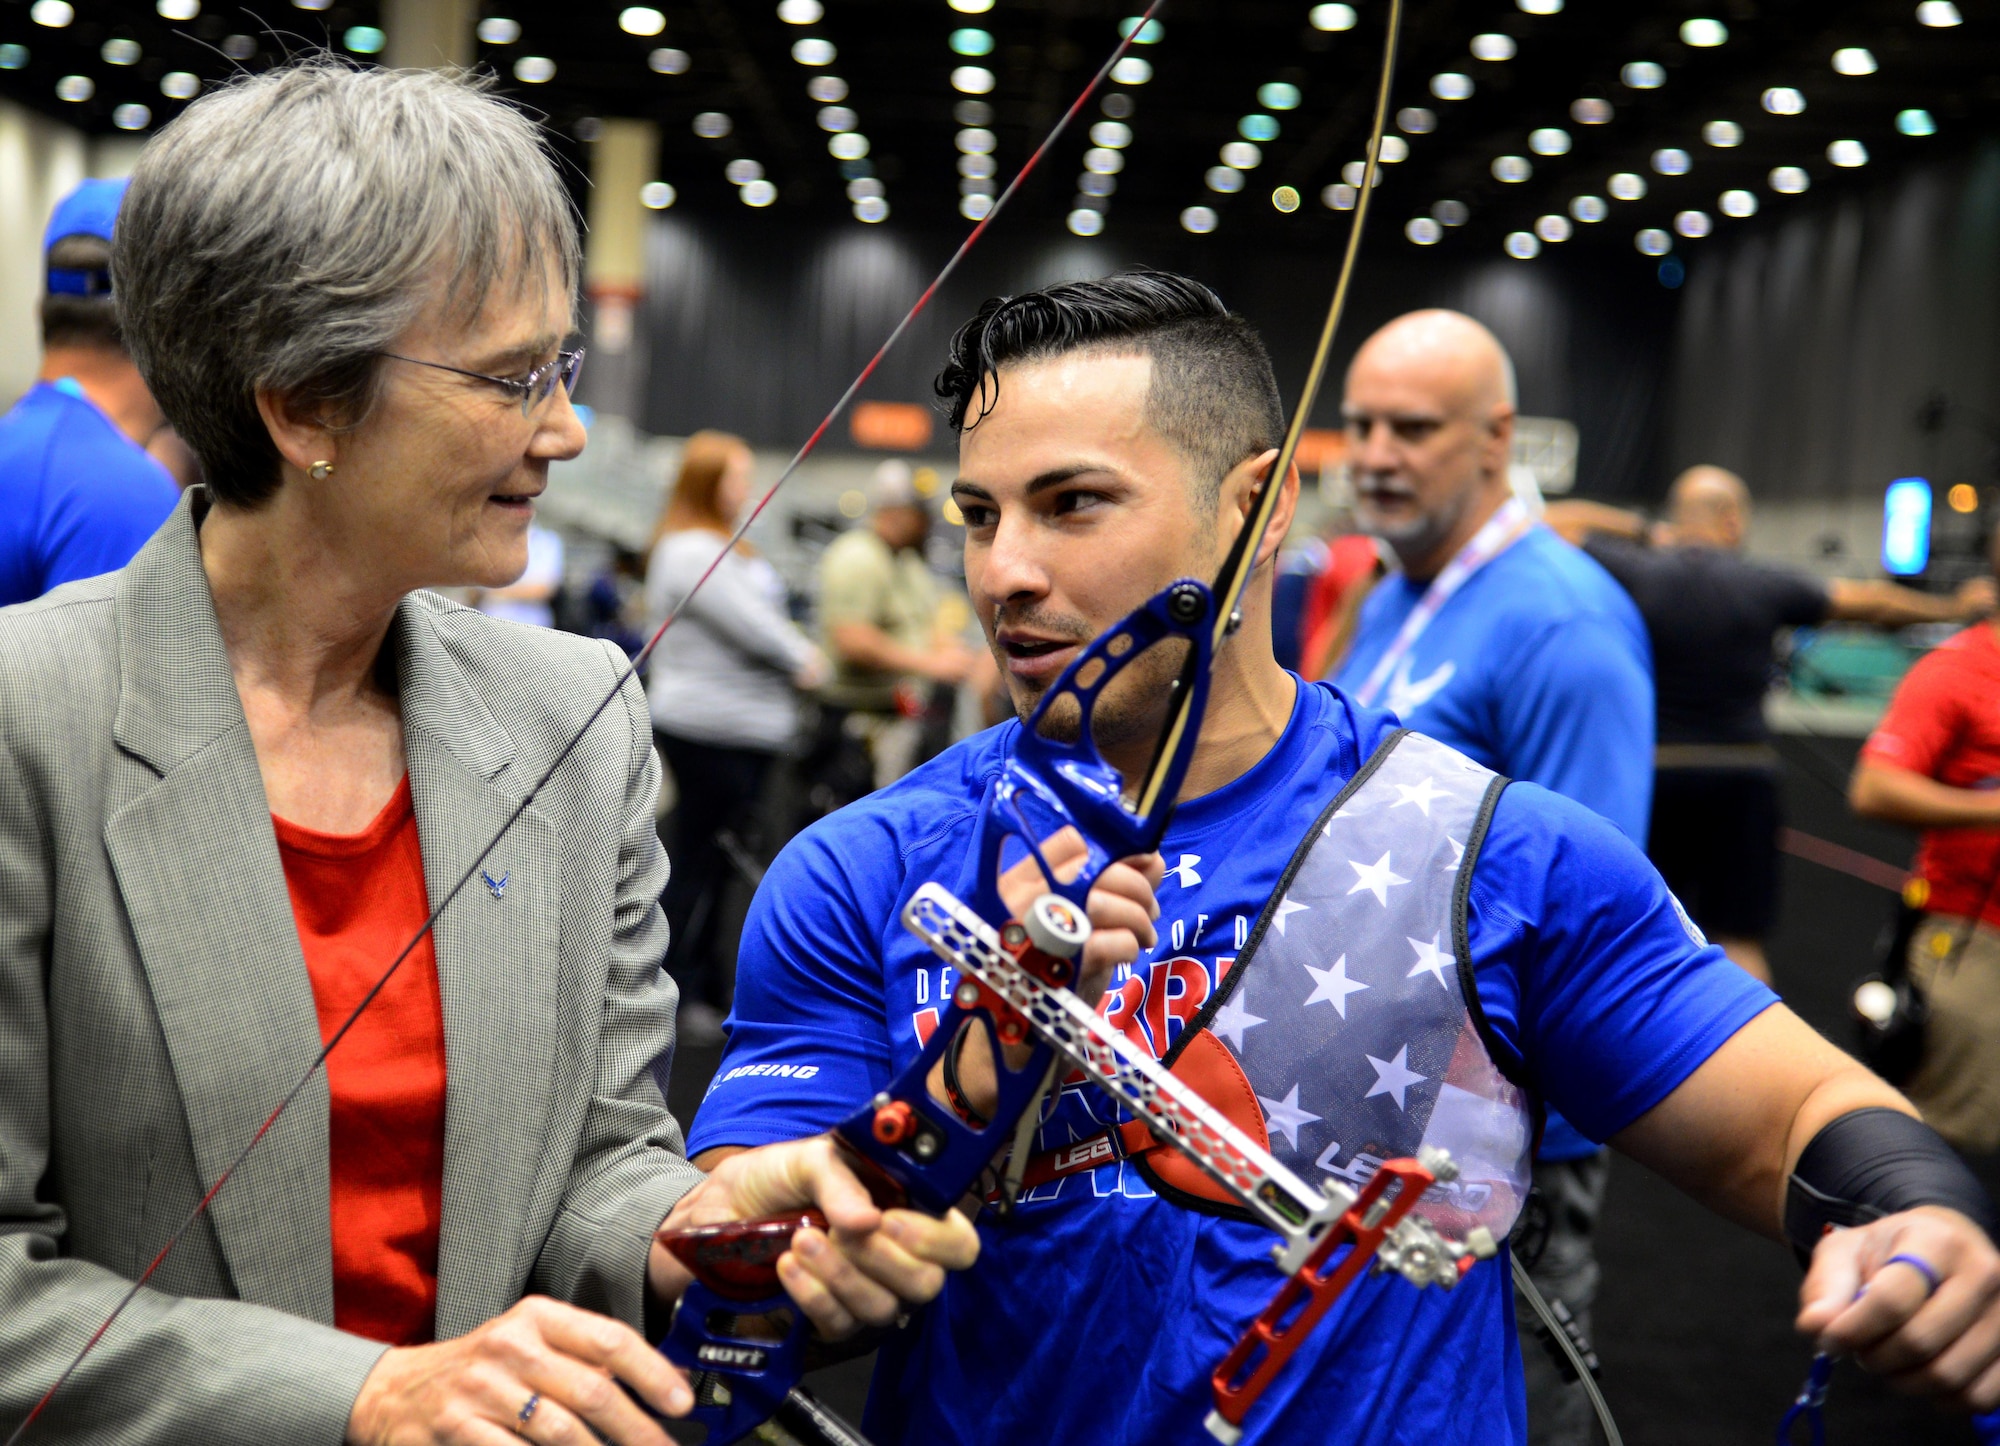 Secretary of the Air Force Heather Wilson speaks with Staff Sgt. Vincent Cavazos, a security forces troop from Fresno, Calif., during a meet-and-greet with archery team athletes at the 2017 Warrior Games July 1, 2017 at McCormick Place-Lakeside Center in Chicago. Cavazos provided Wilson with details surrounding the sporting event as well as bow handling techniques. (U.S. Air Force photo/Staff Sgt. Alexx Pons)
